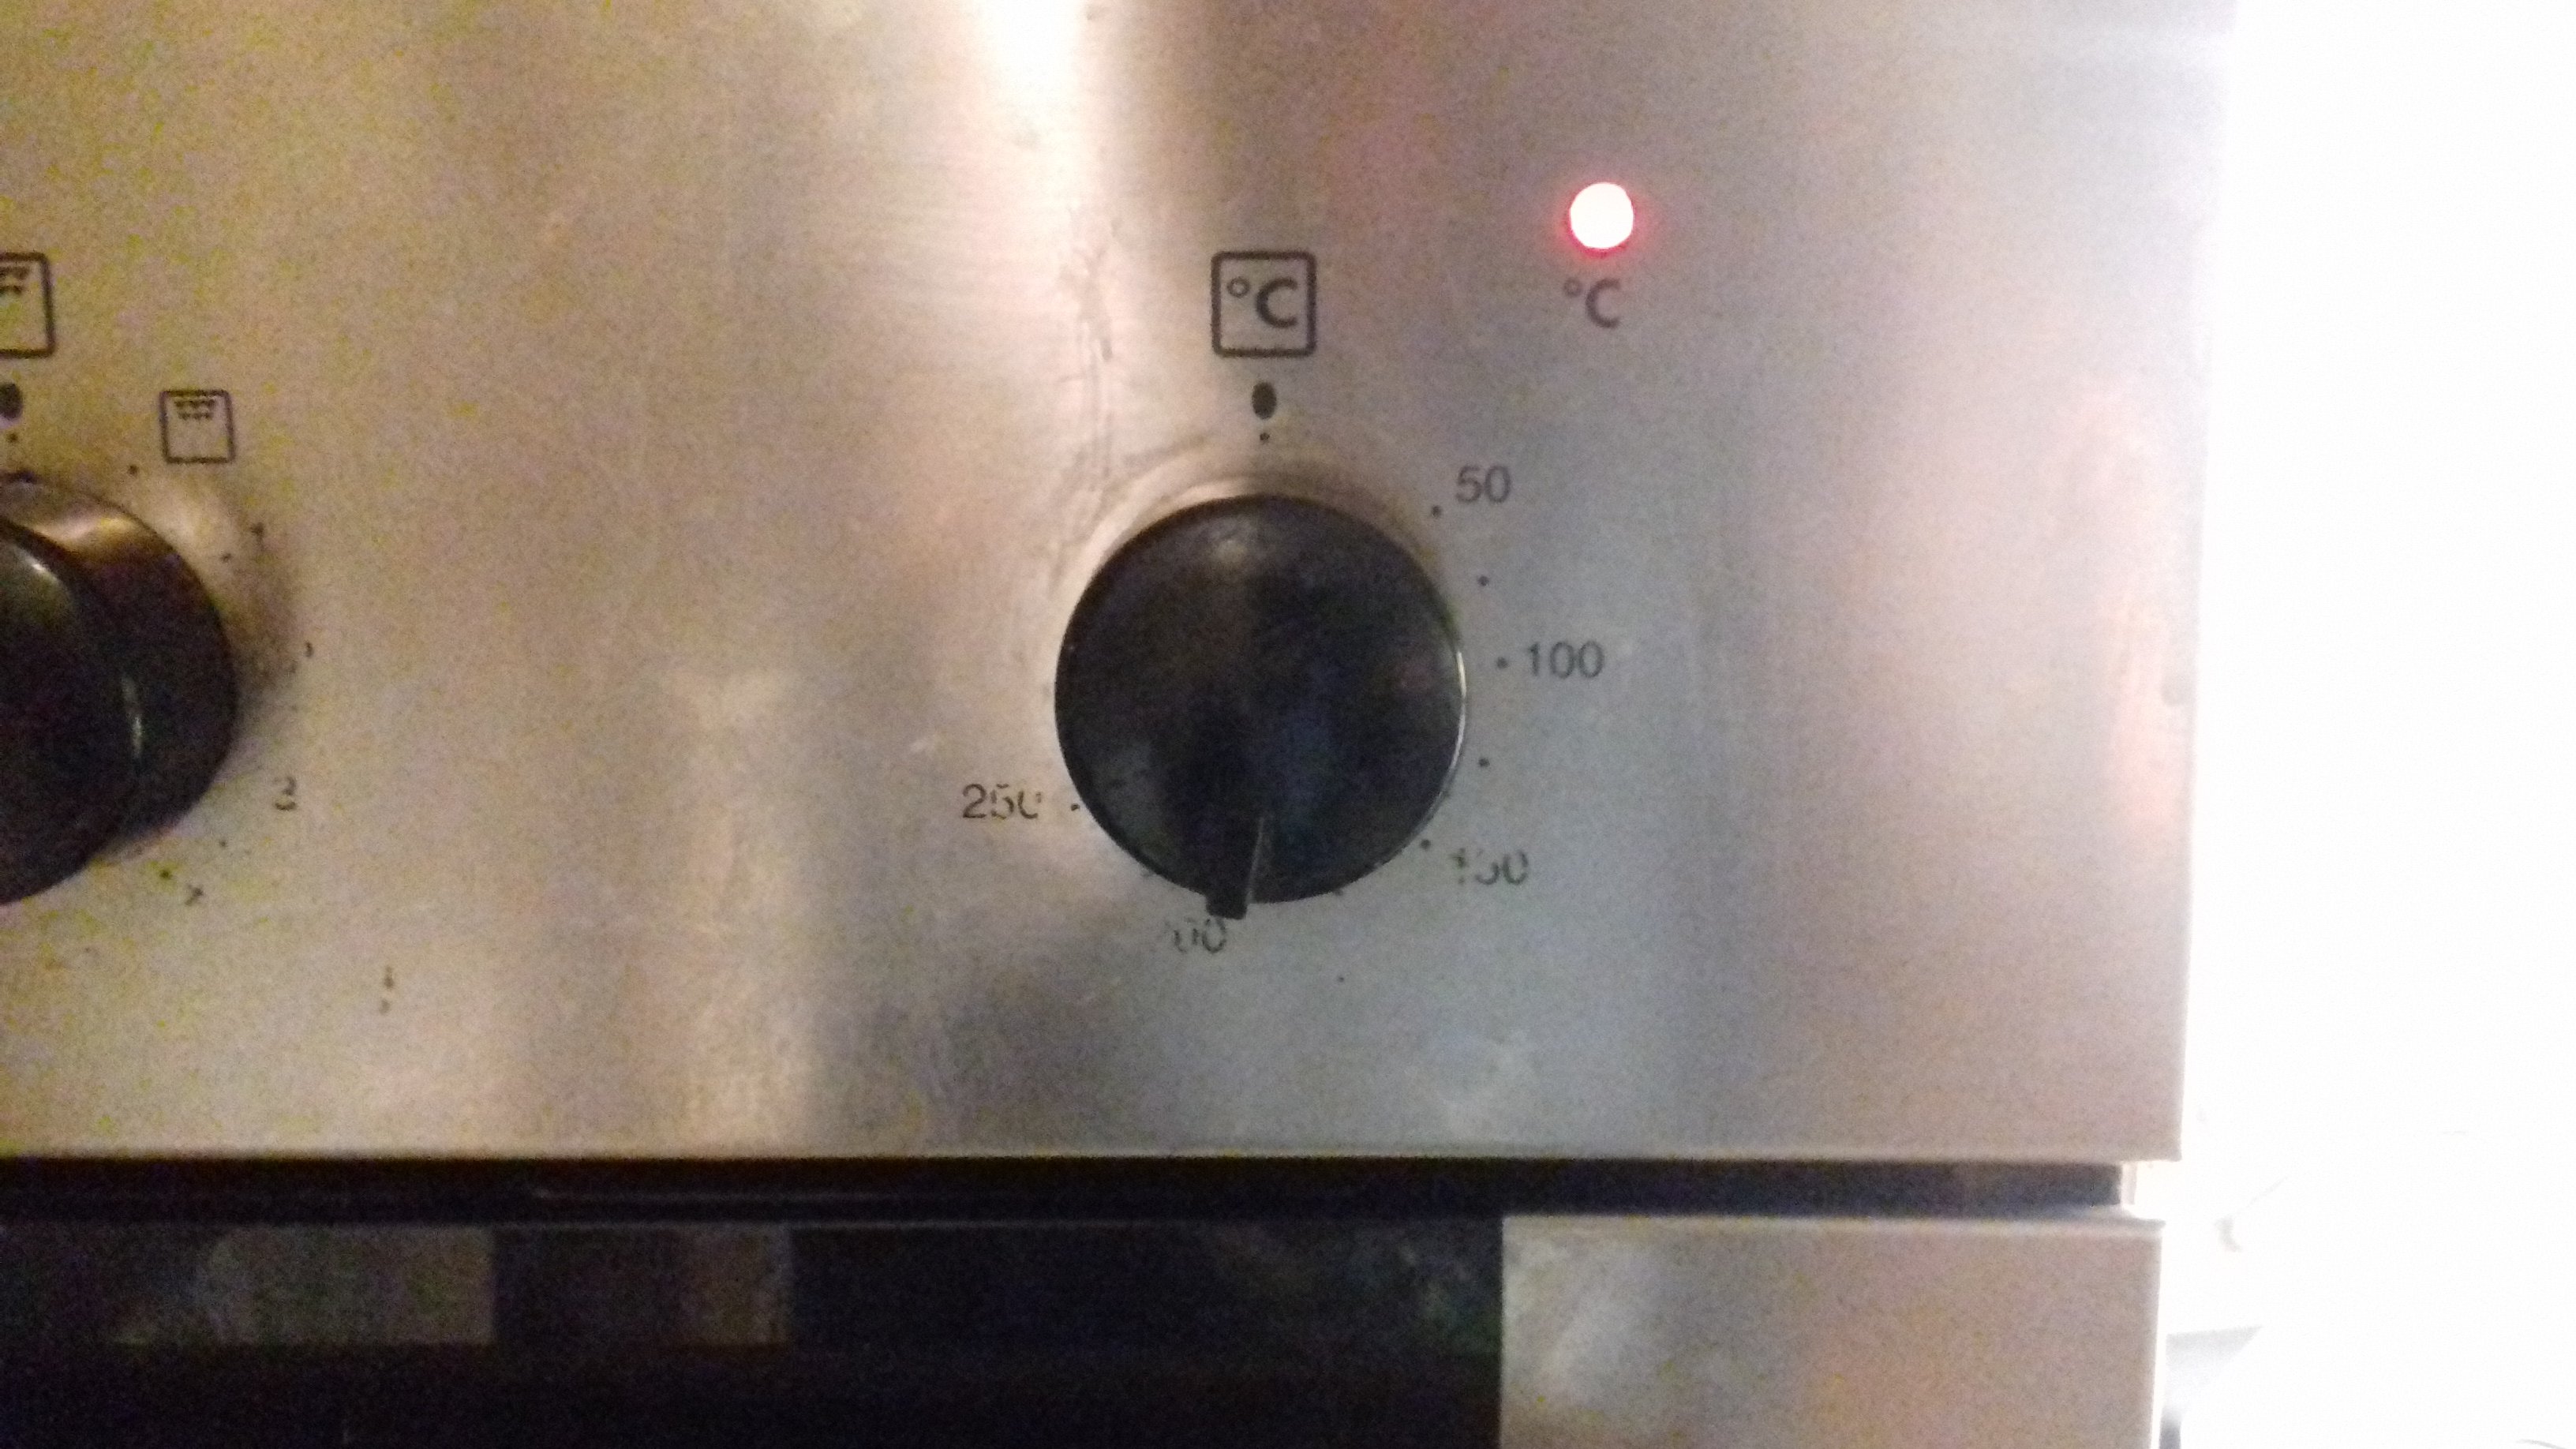 Geschatte Verandering toezicht houden op Gemma Seltzer on Twitter: "Anyone have an #Ikea #Whirlpool oven like this?  (OBI 116) The markings on the panel have rubbed off. Can anyone tell me  what they say?? https://t.co/pffpnCh8zK" / Twitter